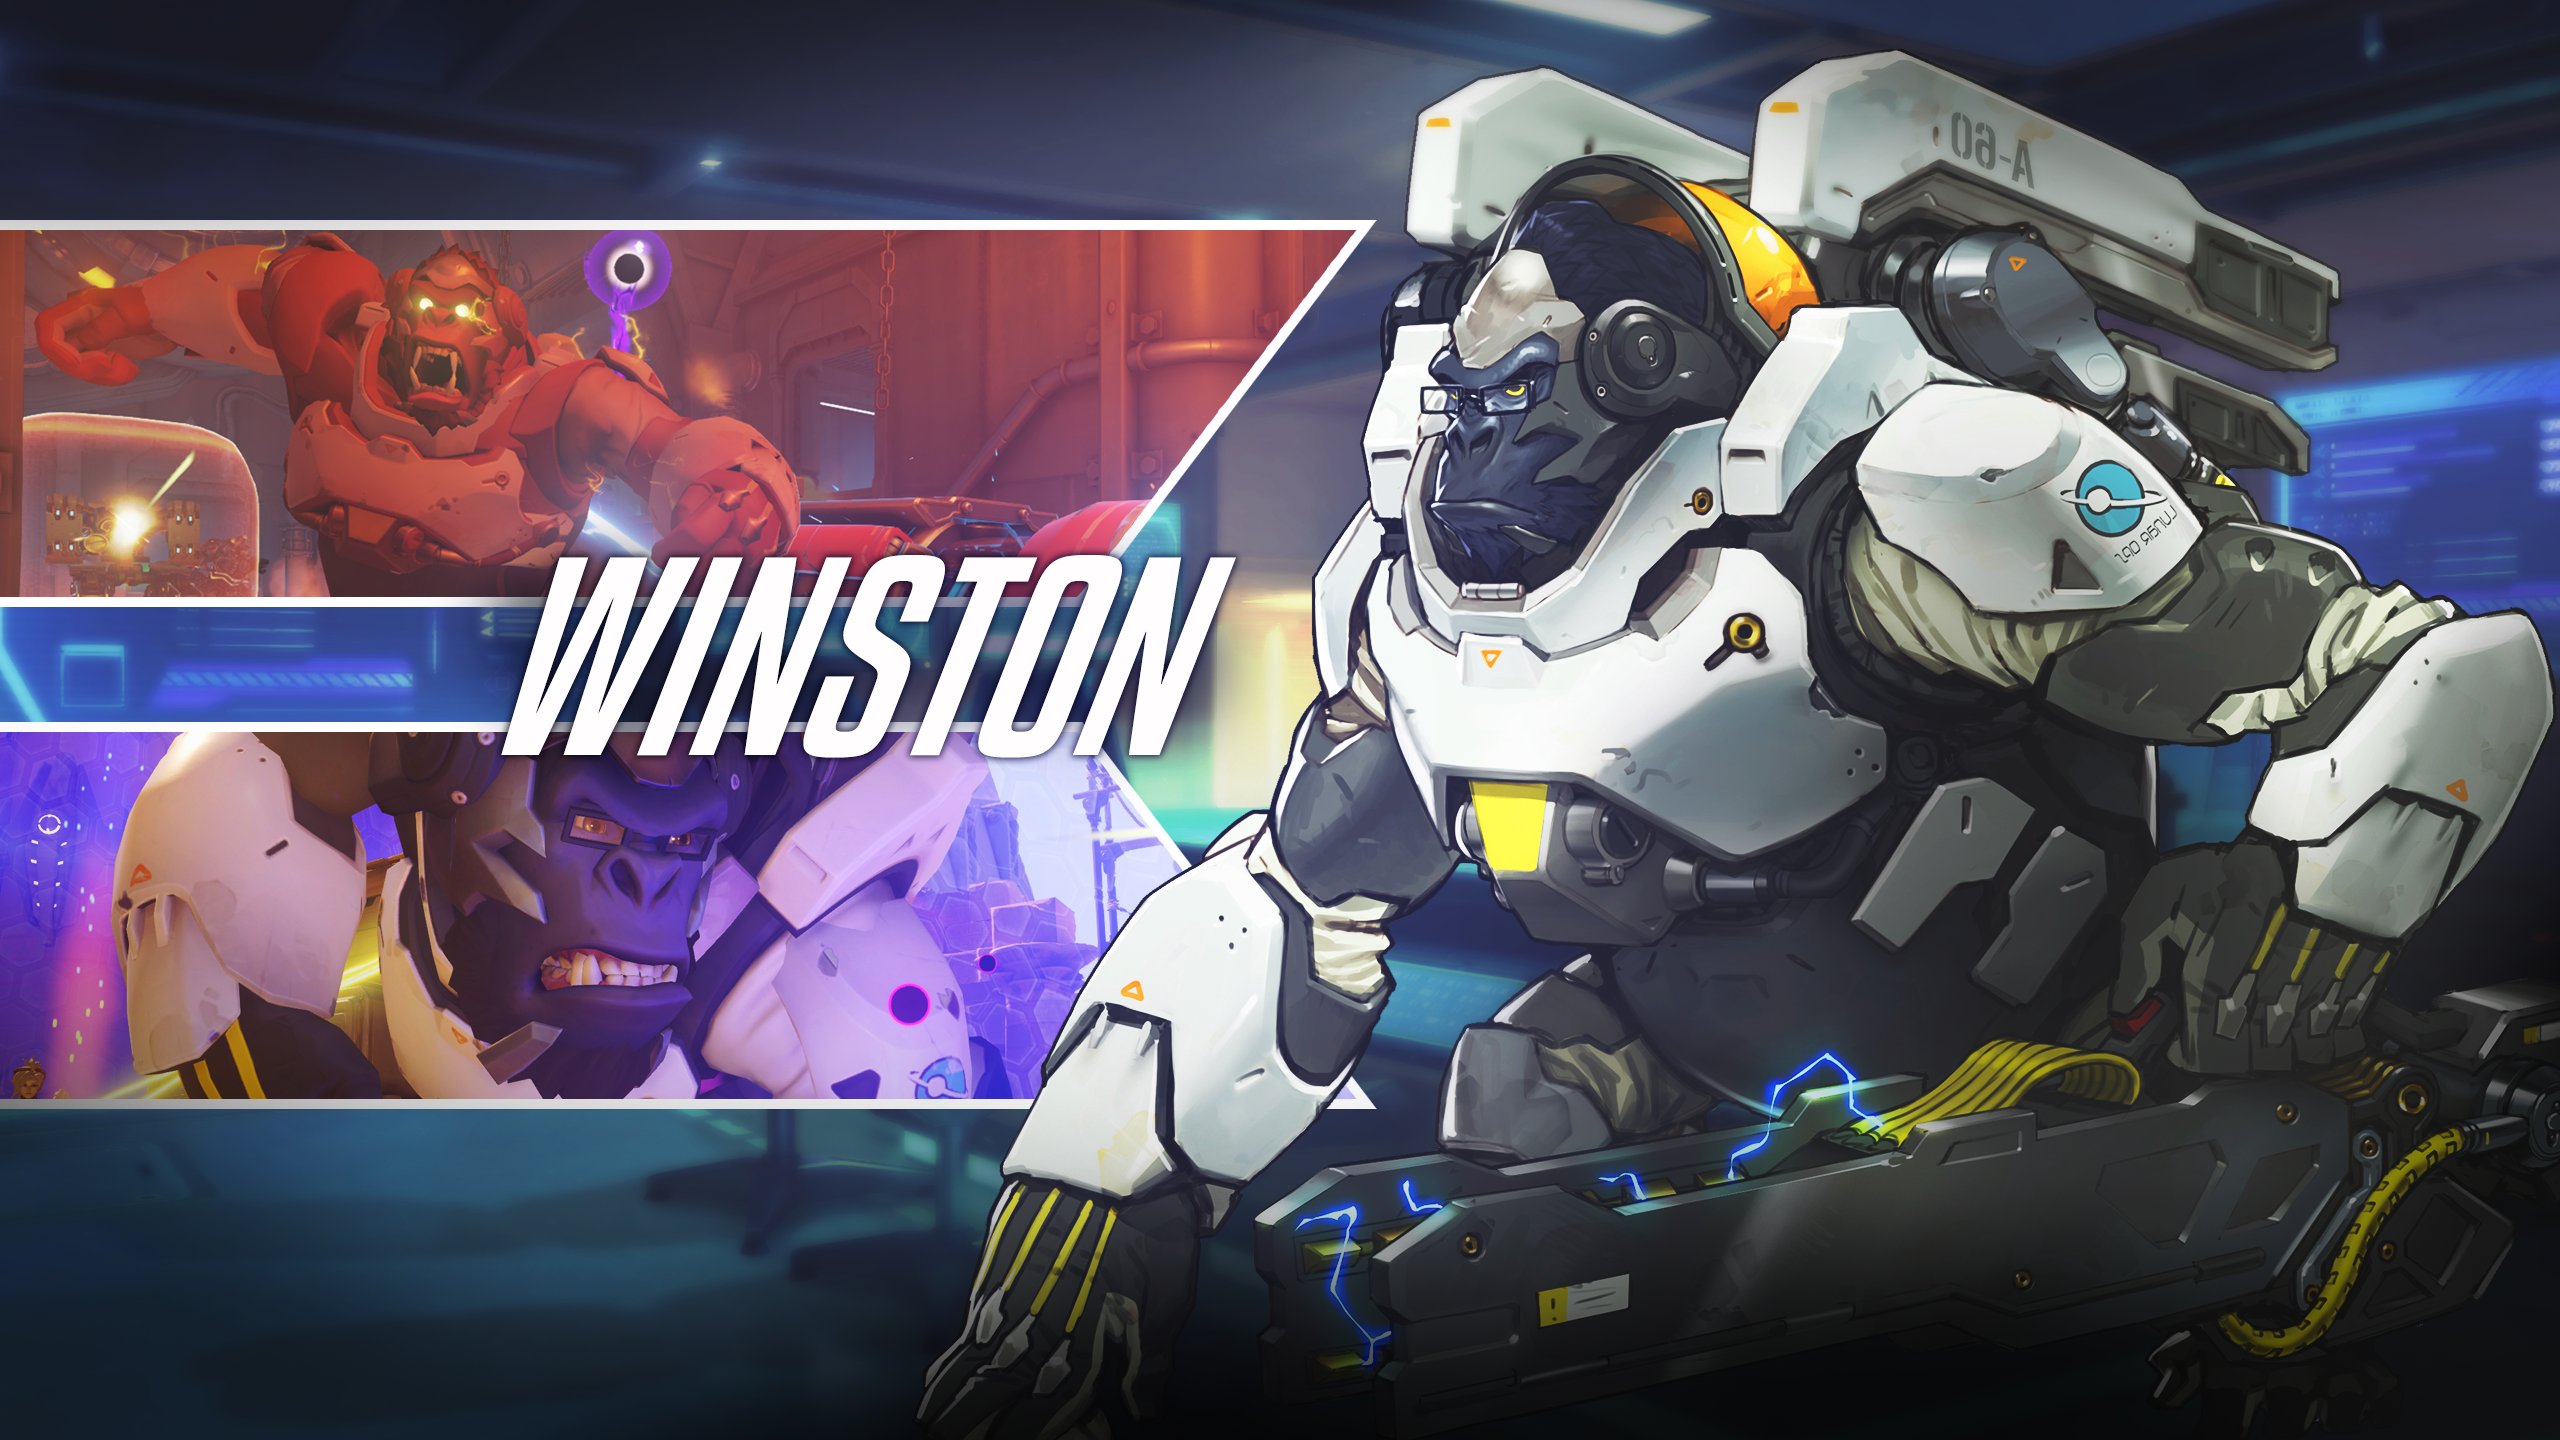 overwatch, Shooter, Action, Fighting, Mecha, Sci fi, Futuristic, Warrior, Poster Wallpaper